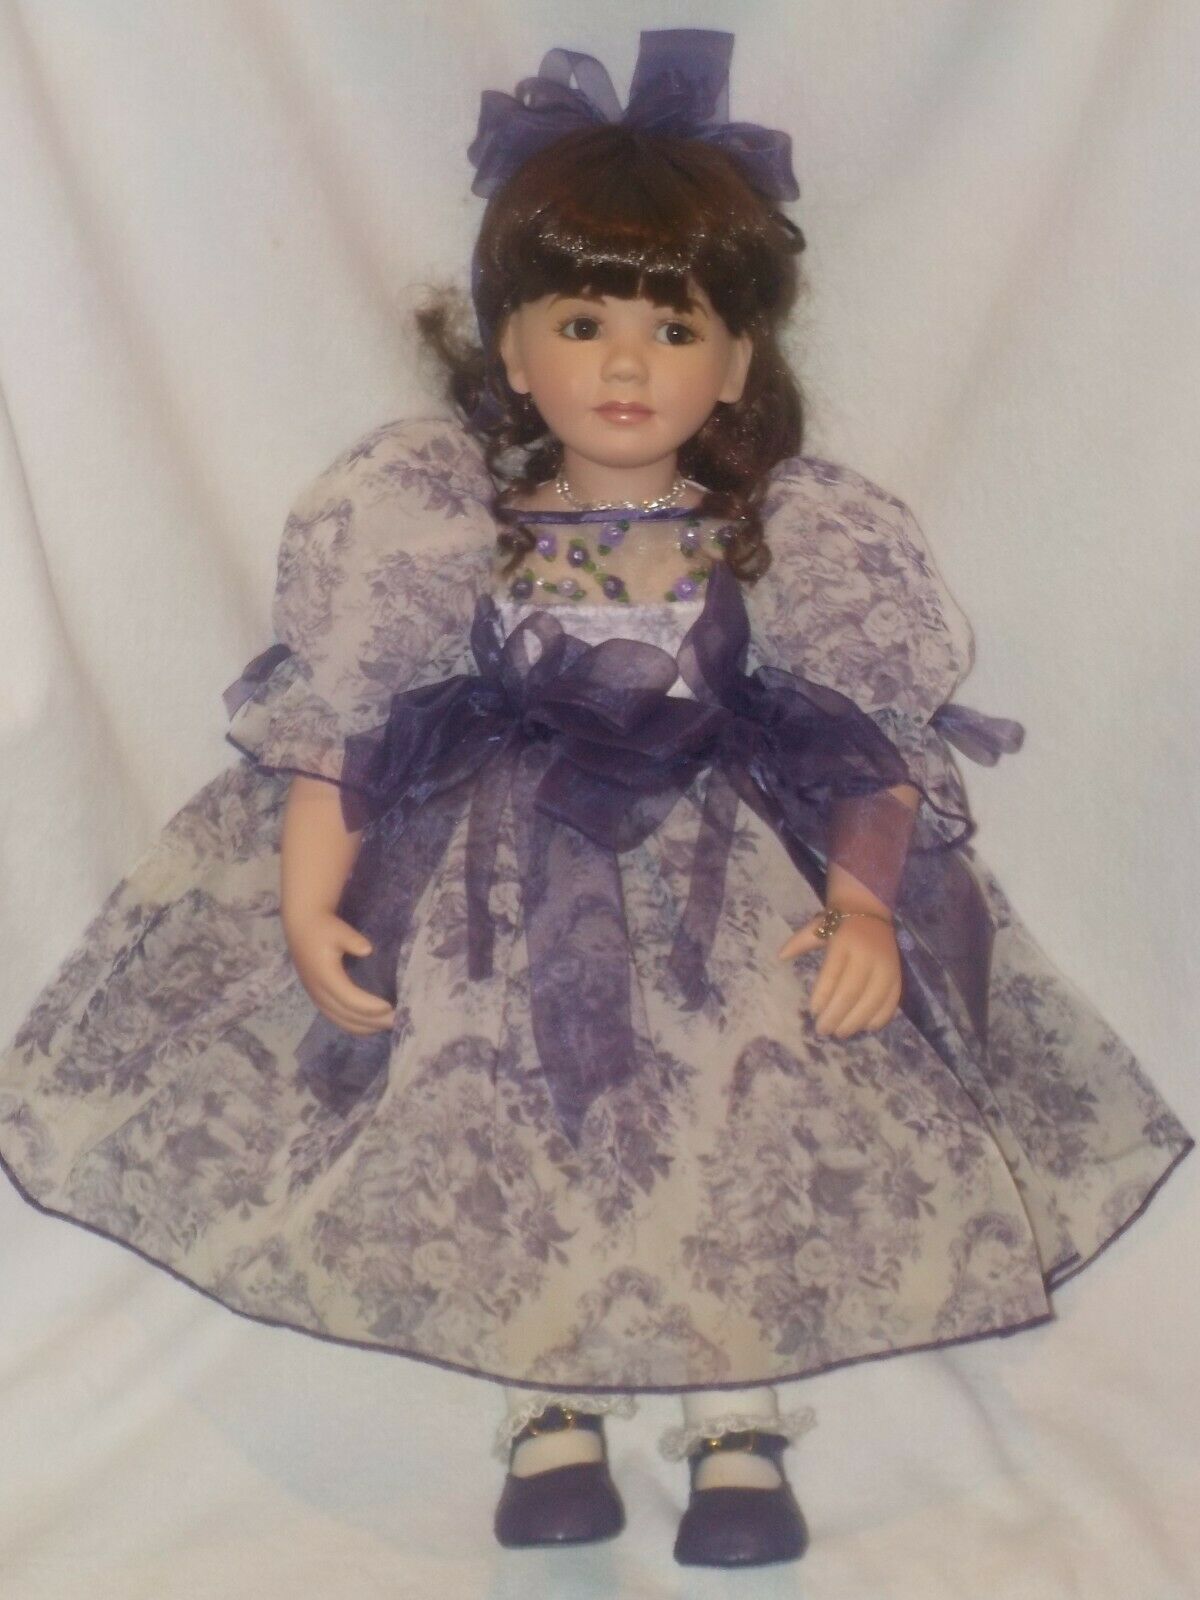 Large 24" "coming Up Roses"  Porcelain Doll By Marie Osmond Dolls 2005